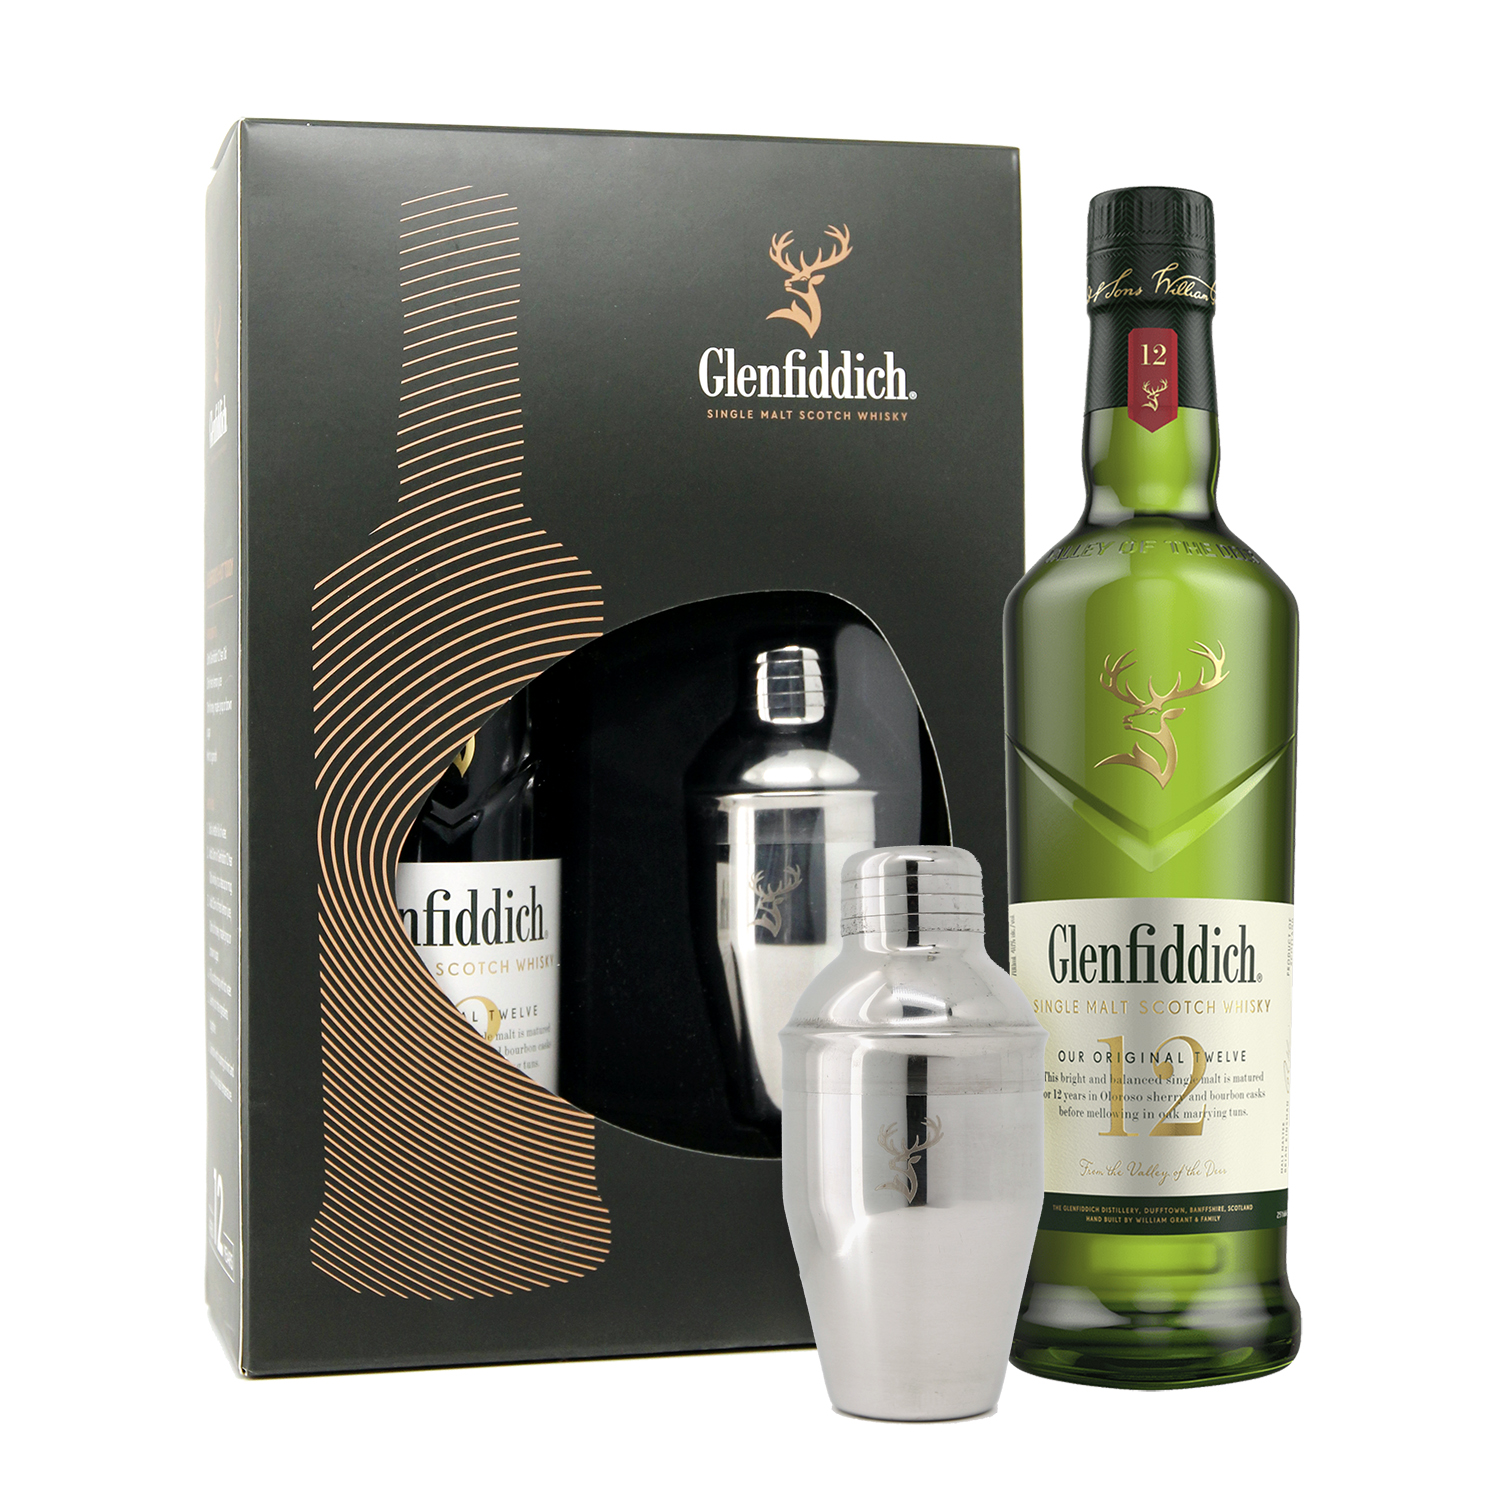 Glenfiddich 12 Years Old Single Malt Scotch Whisky Gift Box With Shaker, 700ml